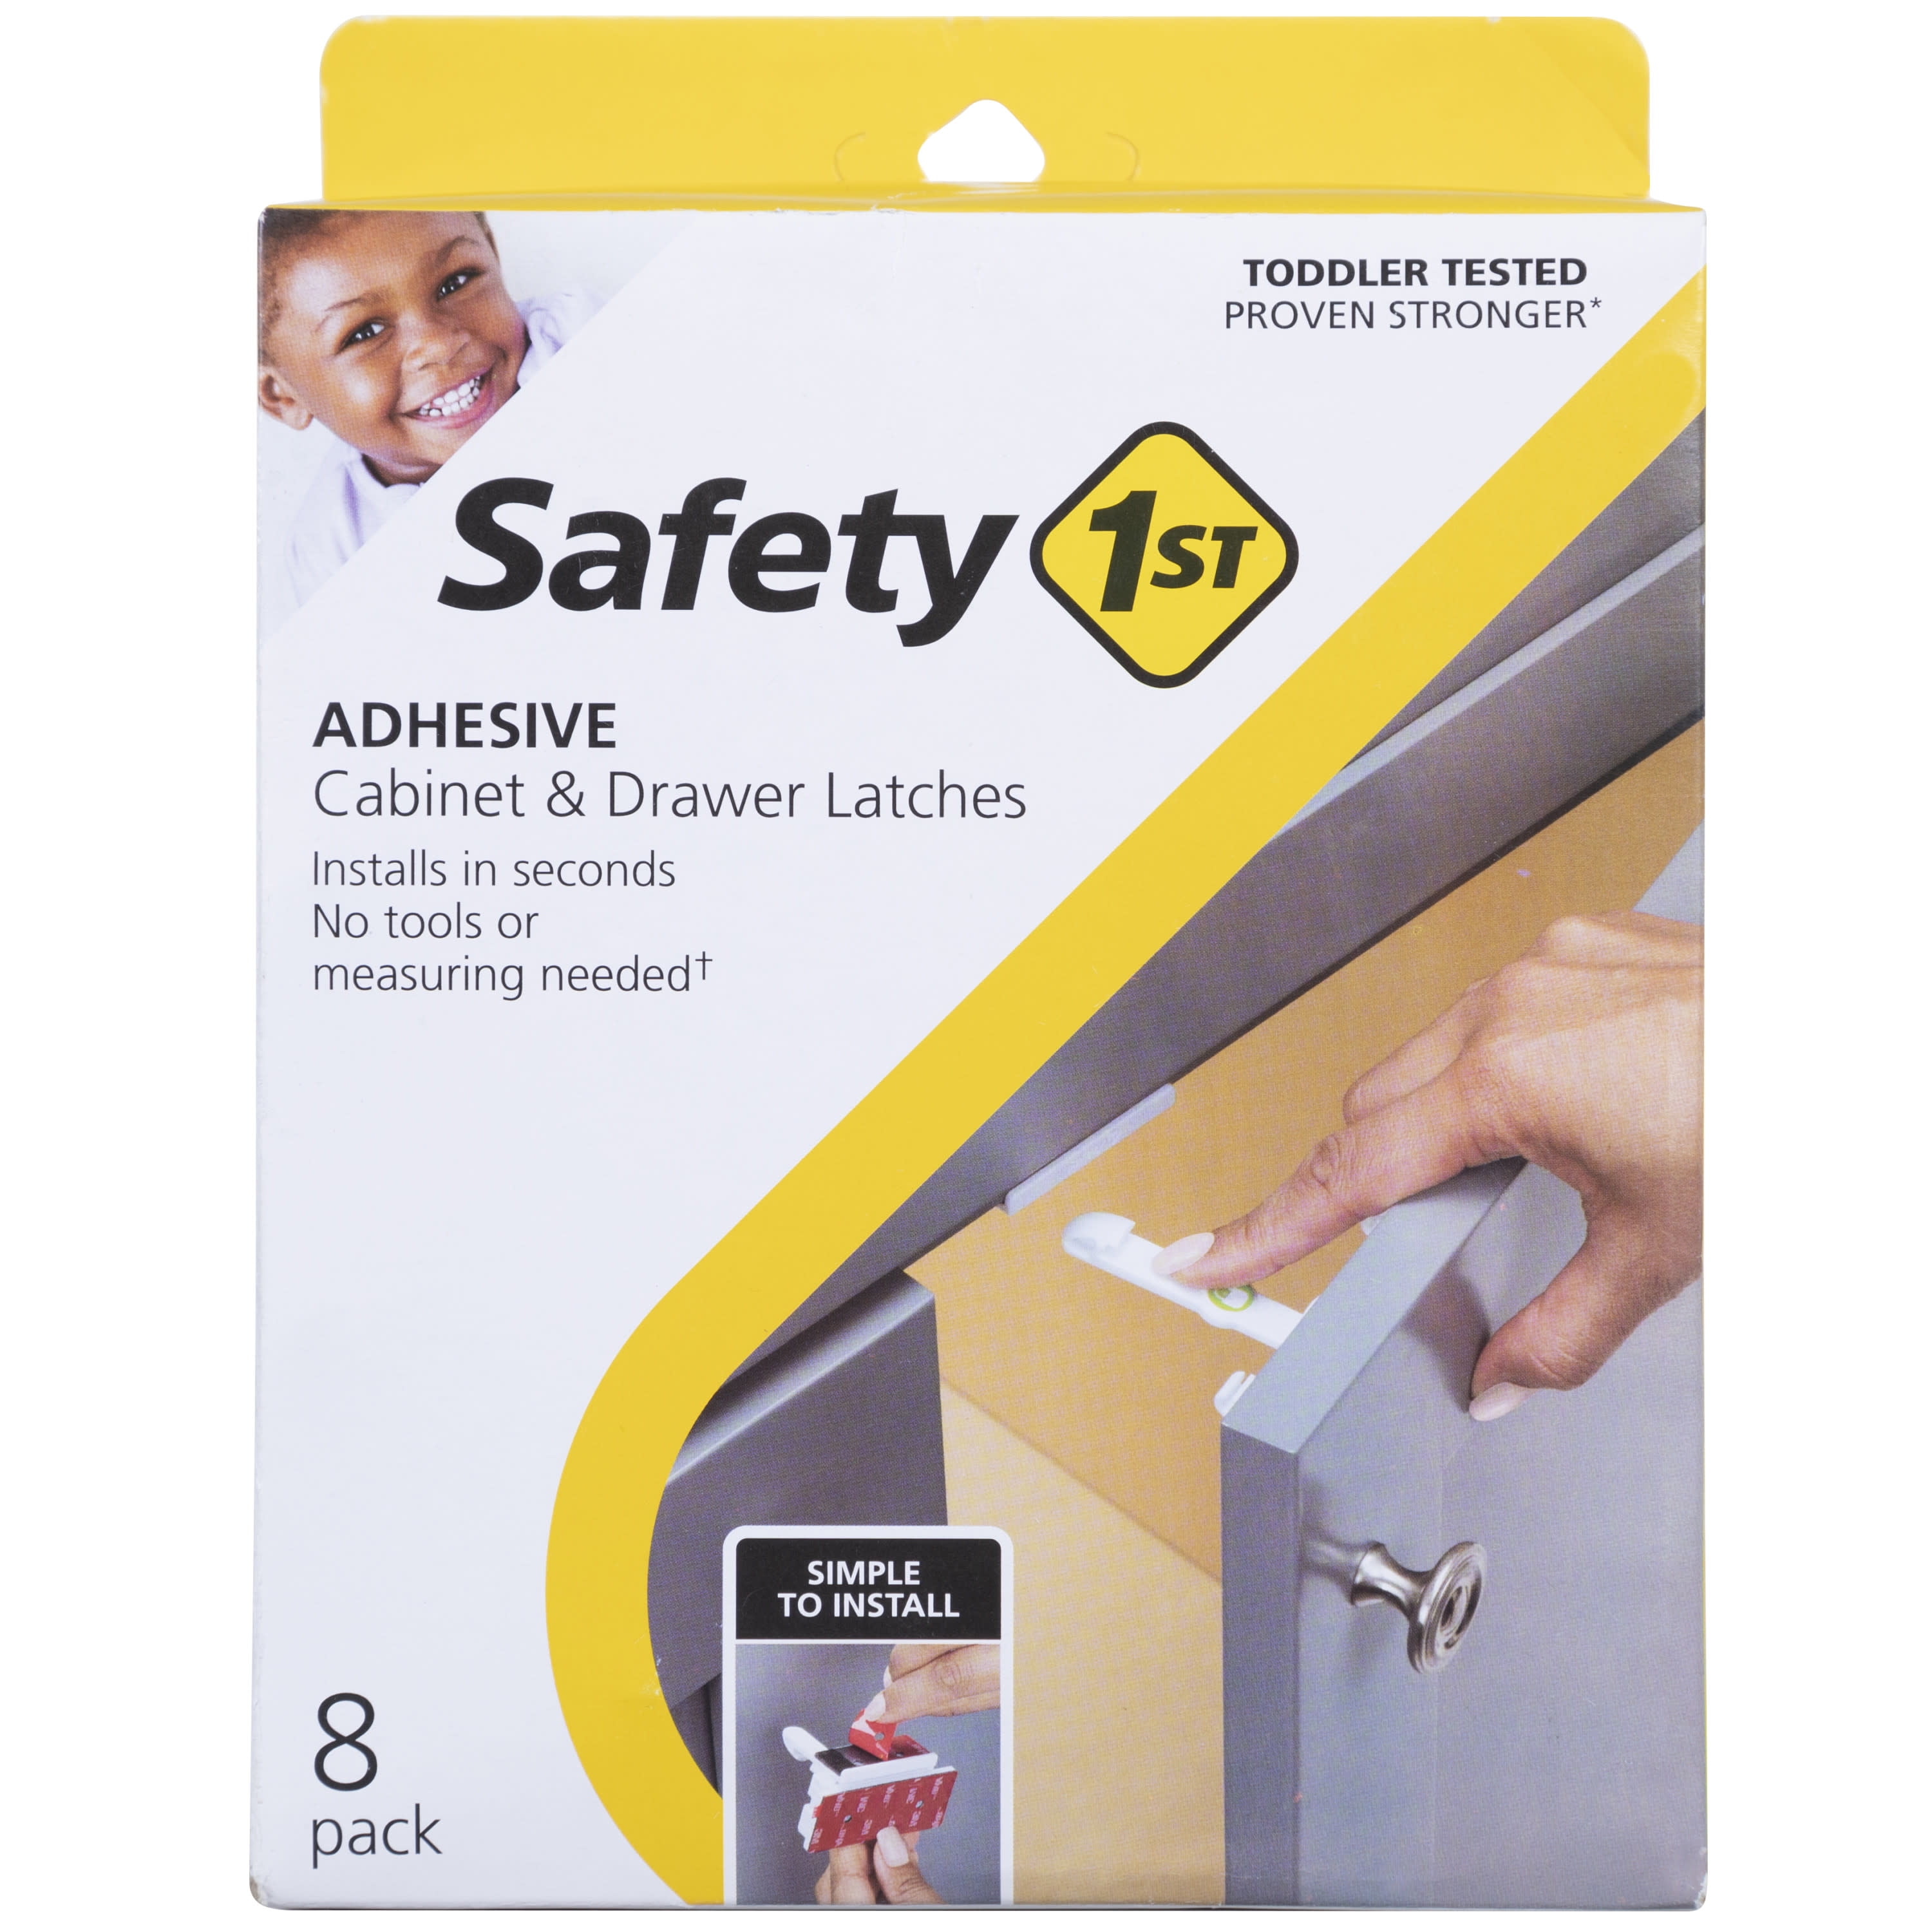 Safety 1st Adhesive Cabinet Latch For Childproofing - 4pk : Target